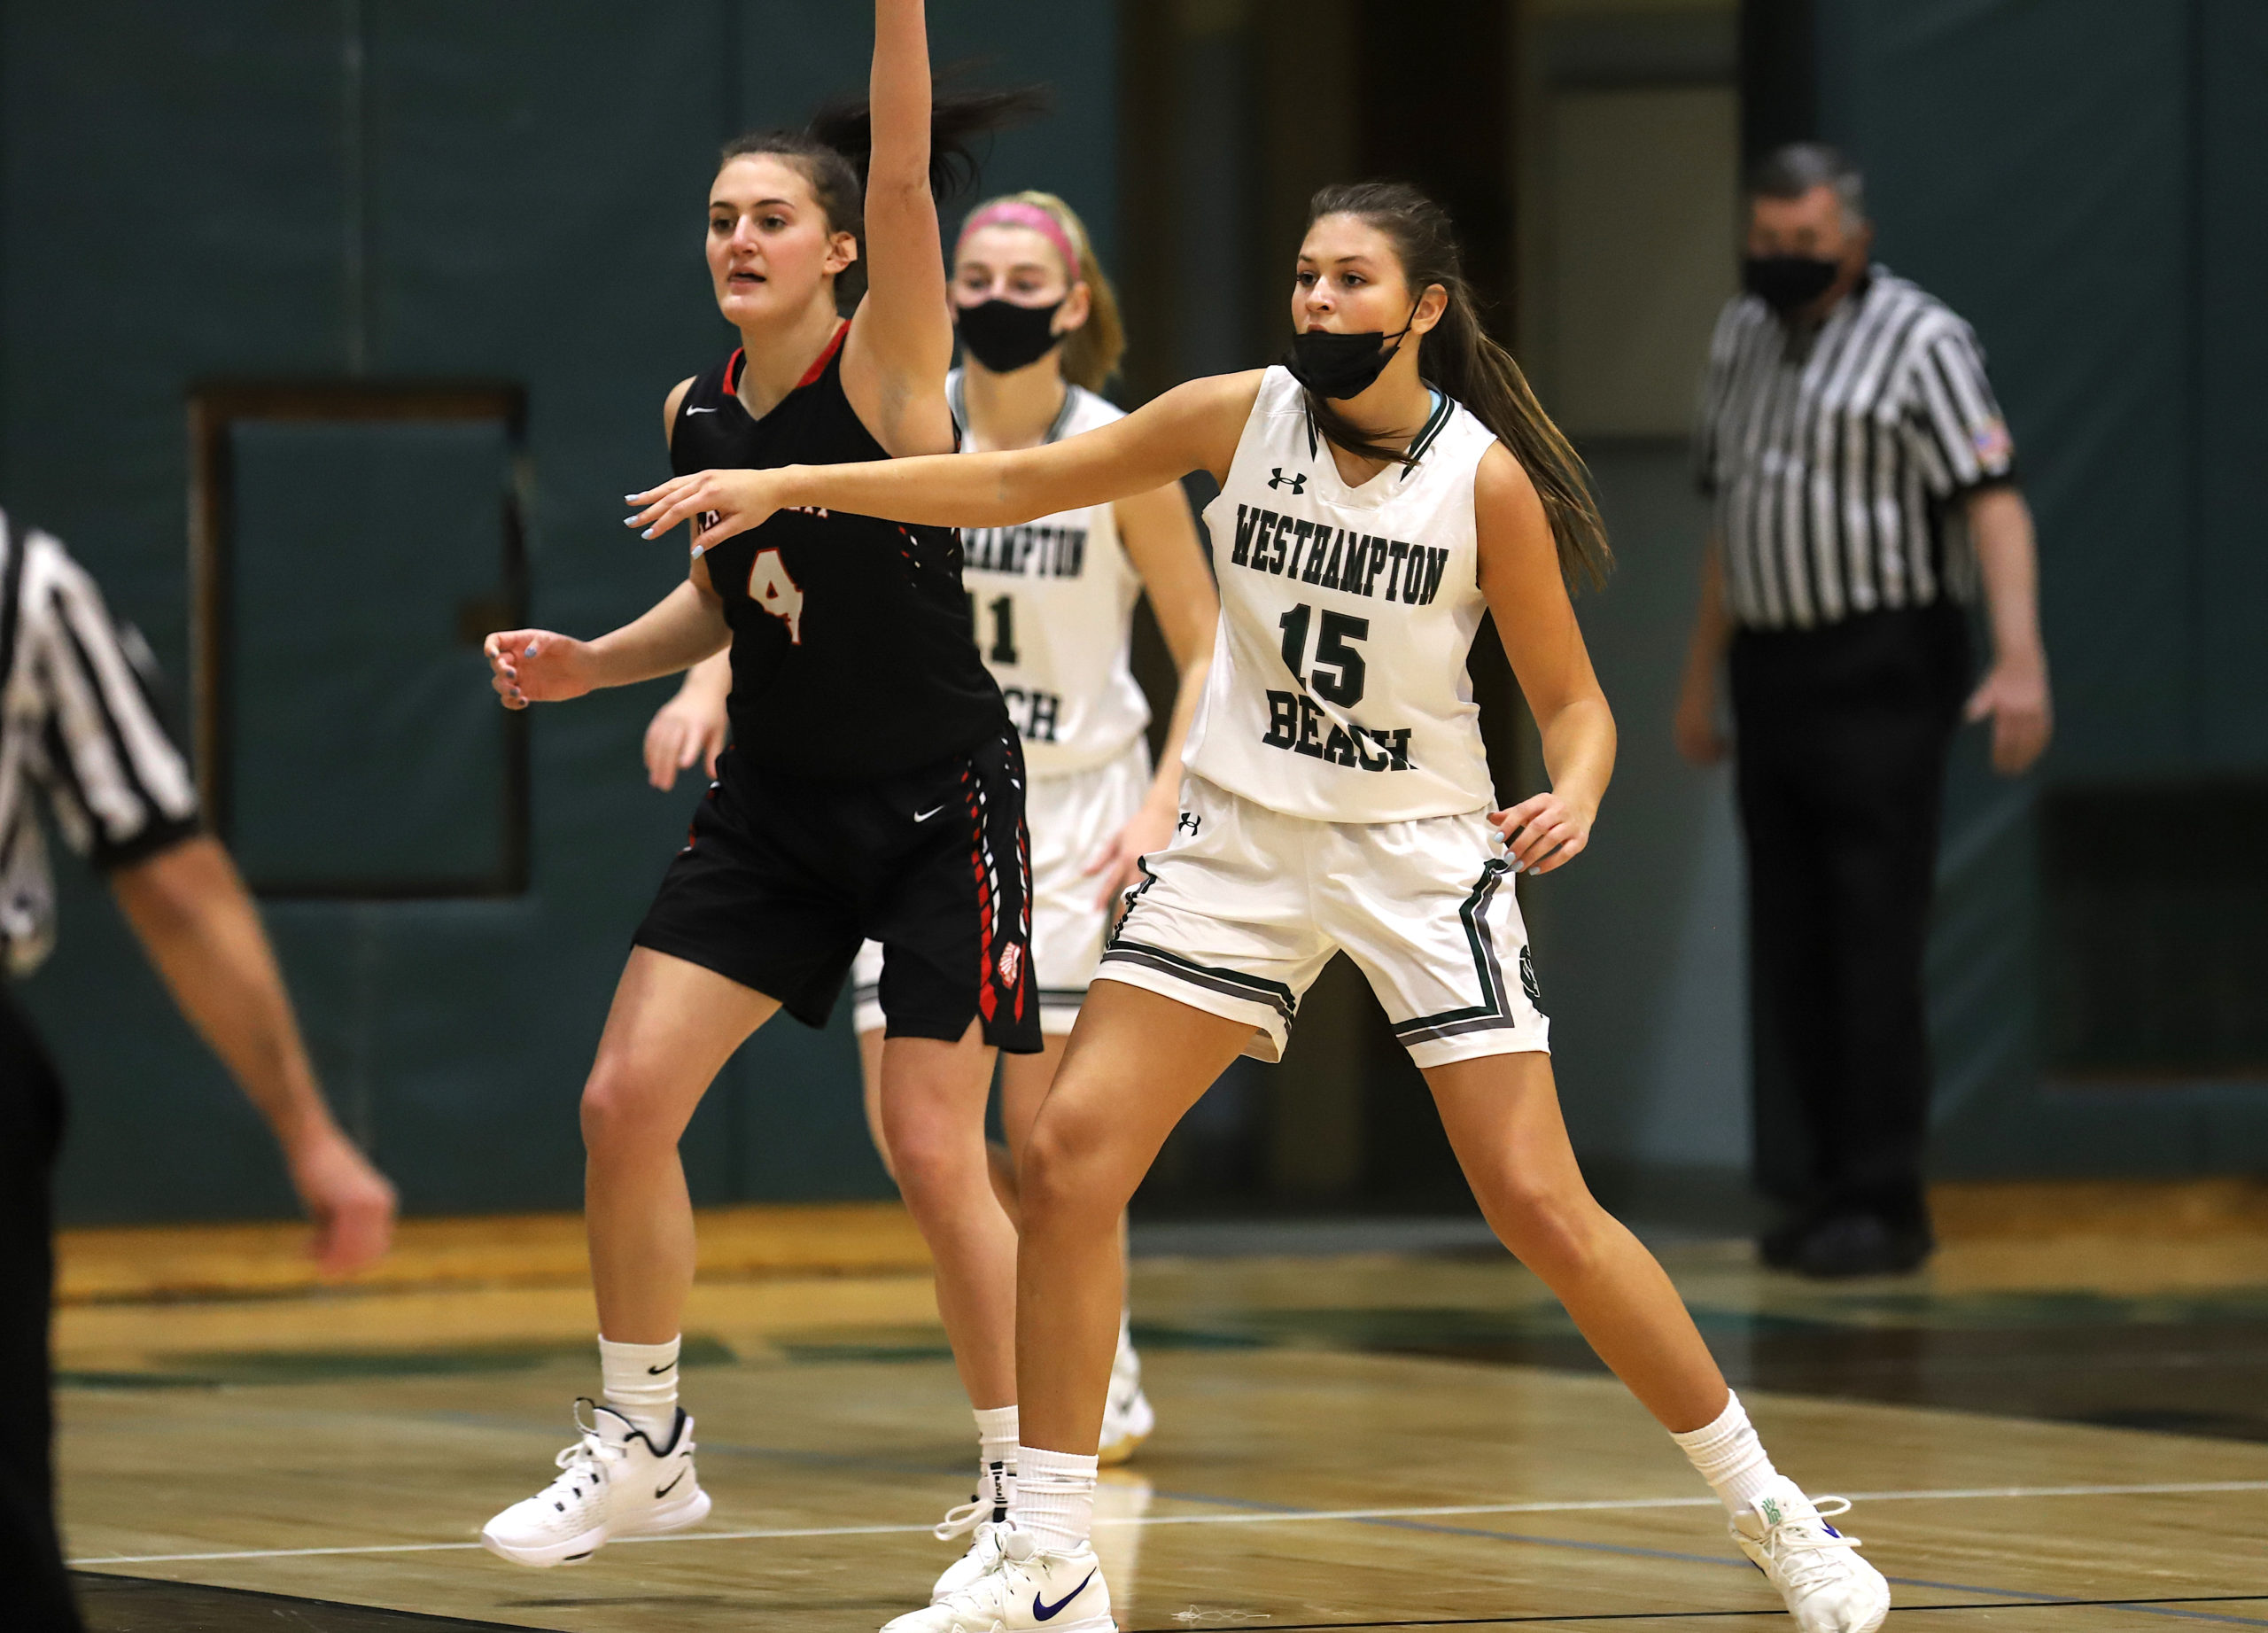 Westhampton Beach senior guard Olivia Rongo gets open for a pass in a game last season. CHRISTINE HEEREN